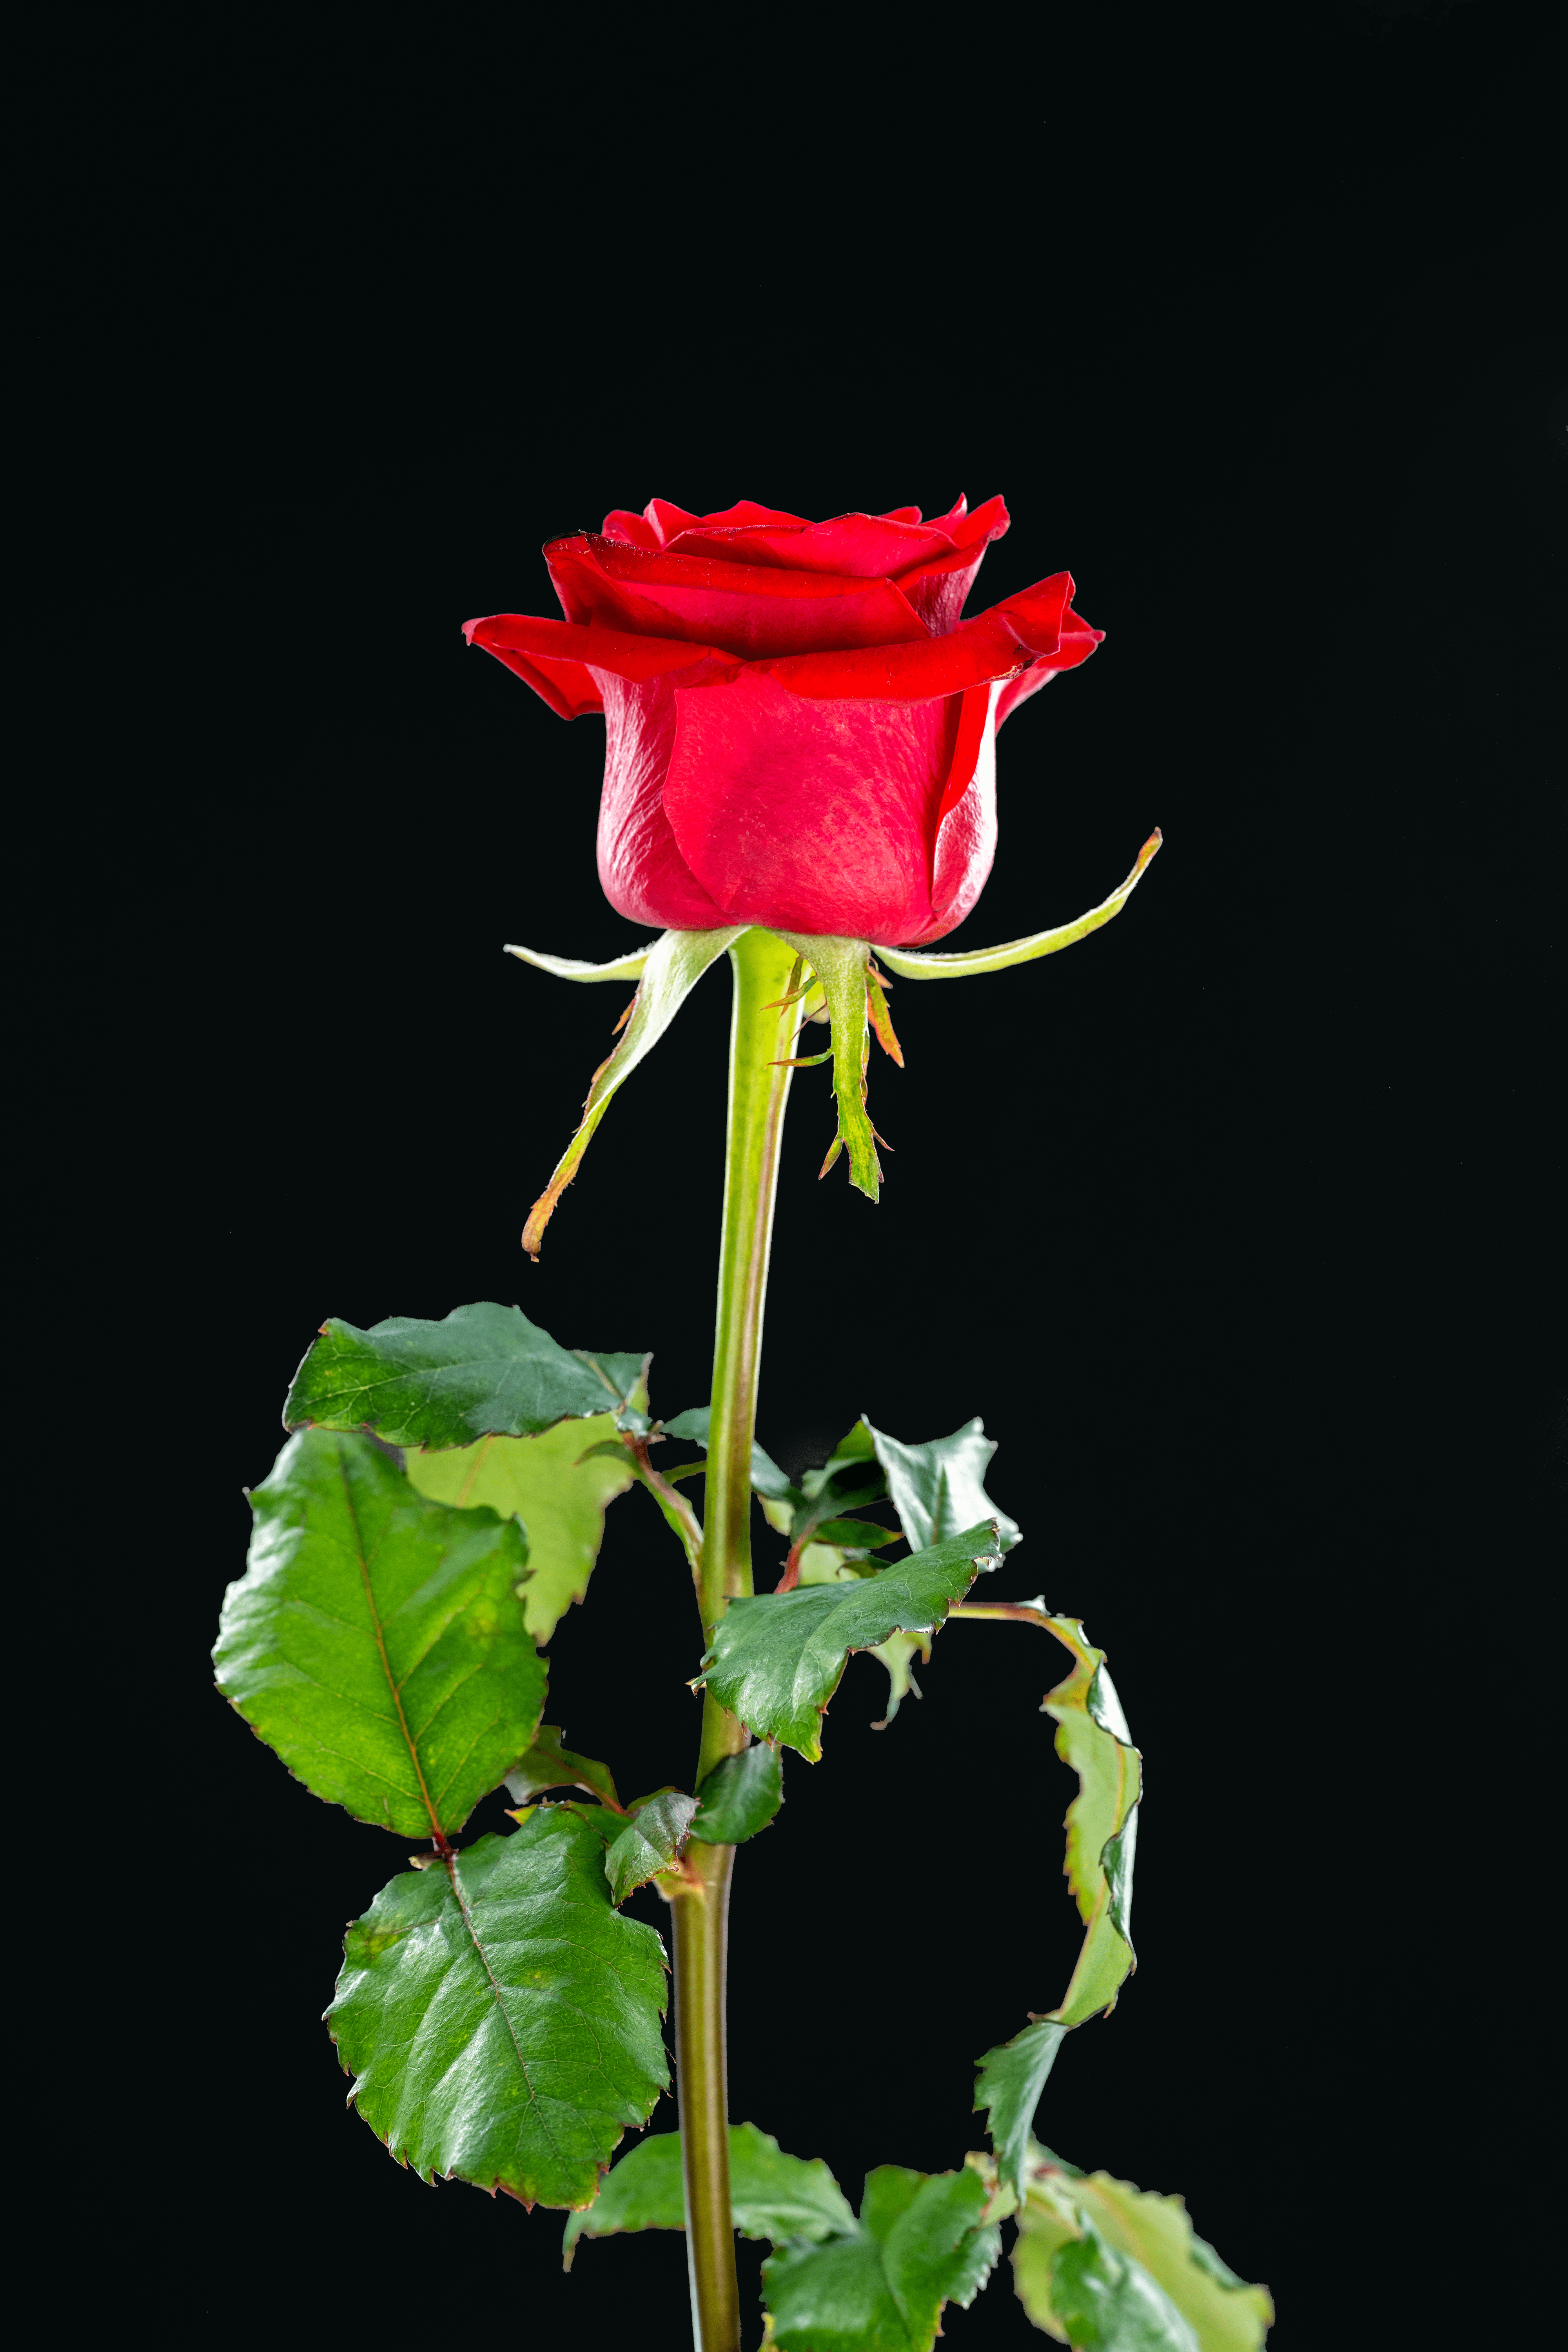 Love is ... To give from the heart. Red rose.